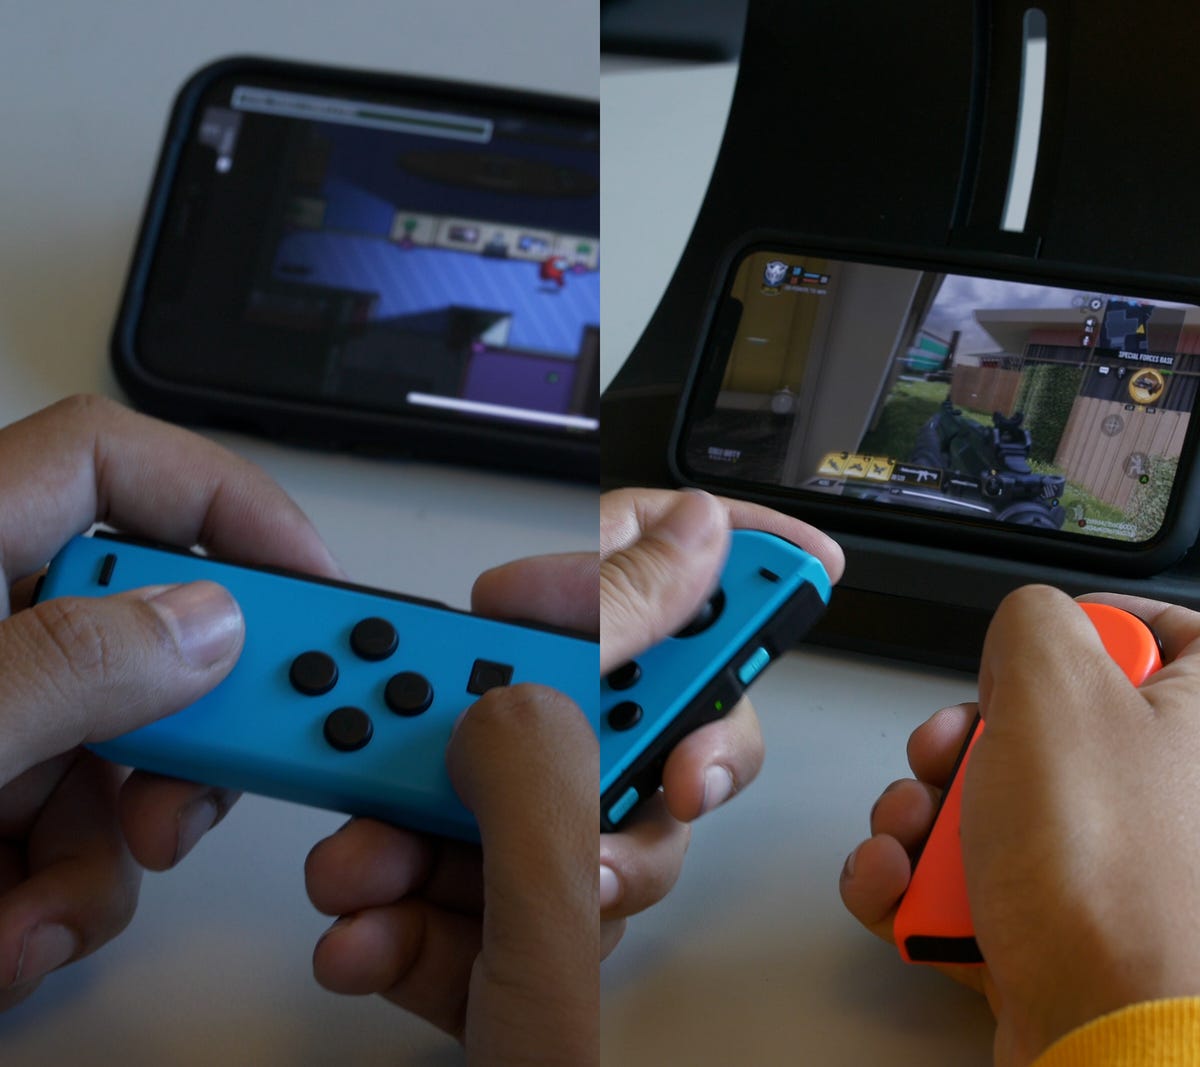 iOS 16 Lets You Connect Nintendo Switch Controllers to Your iPhone or iPad
                        Pairing Nintendo Joy-Cons to your Apple device takes just a few seconds. Here's how to do it.